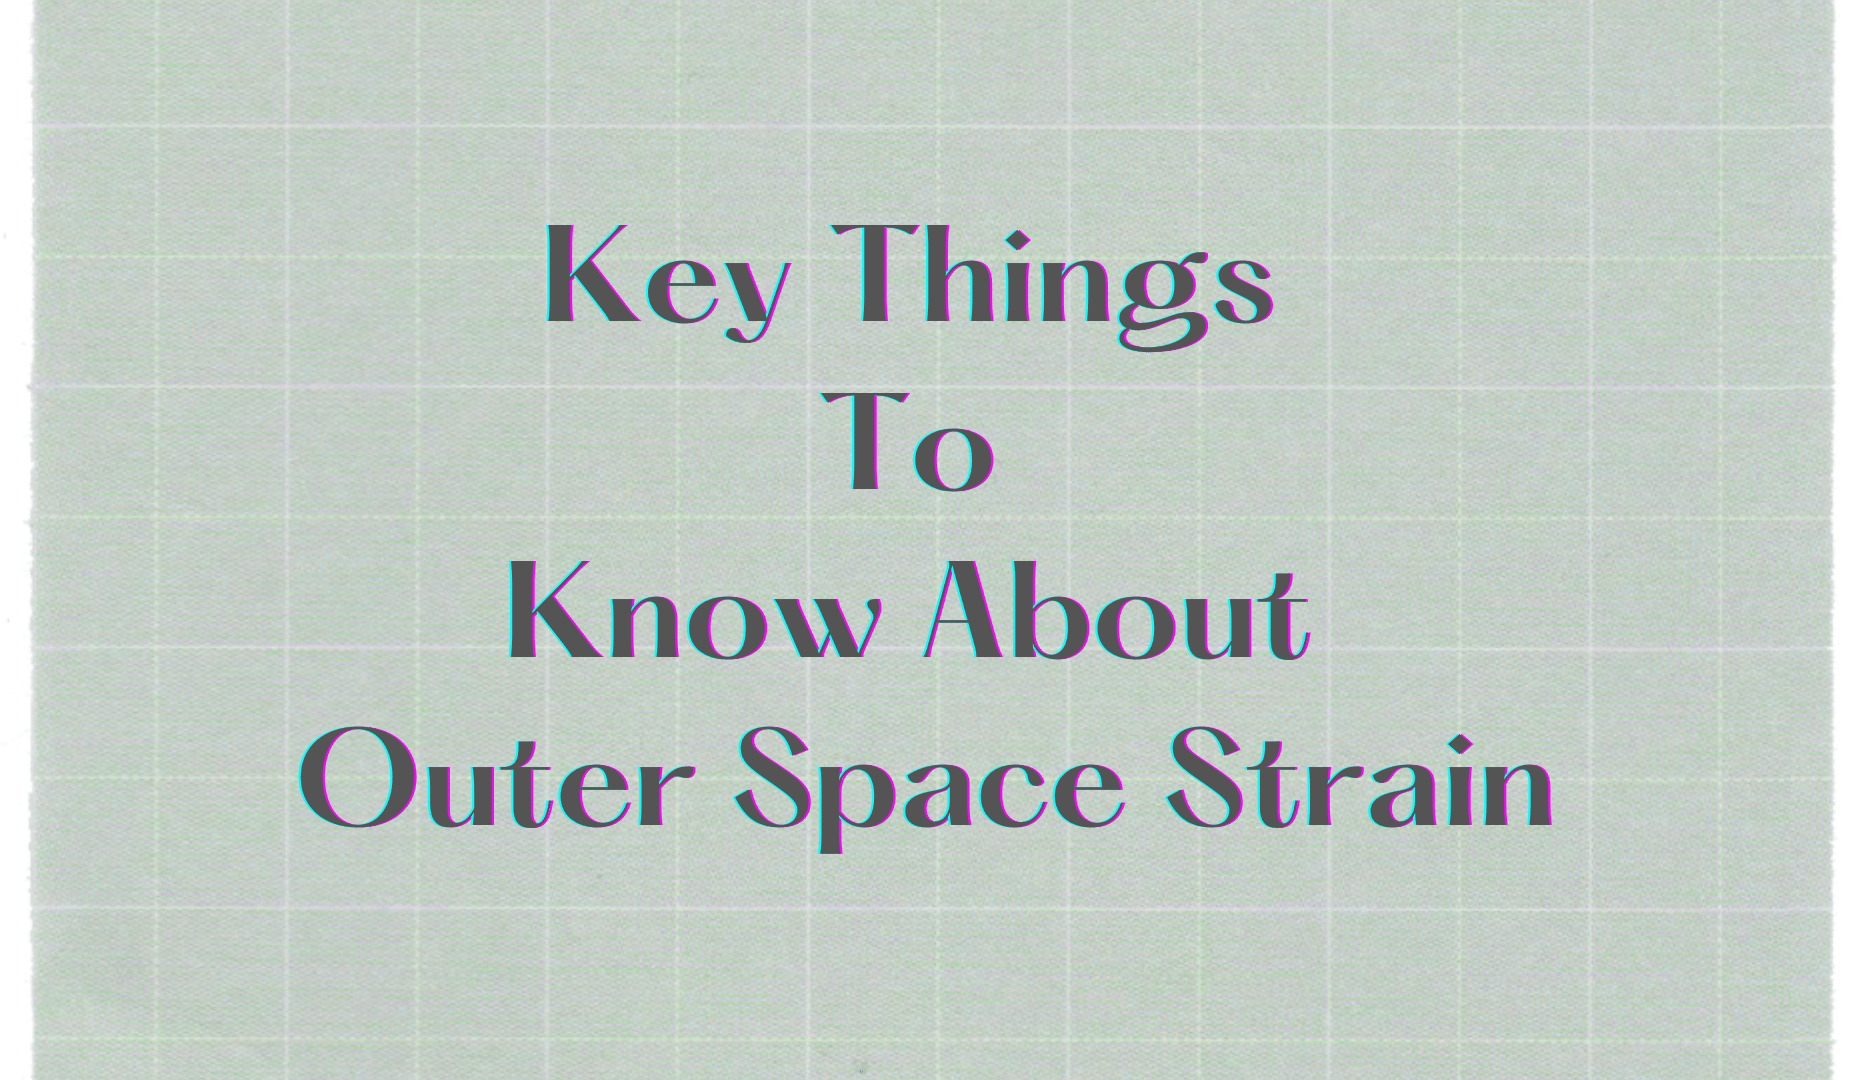 Key Things To Know About Outer Space Strain